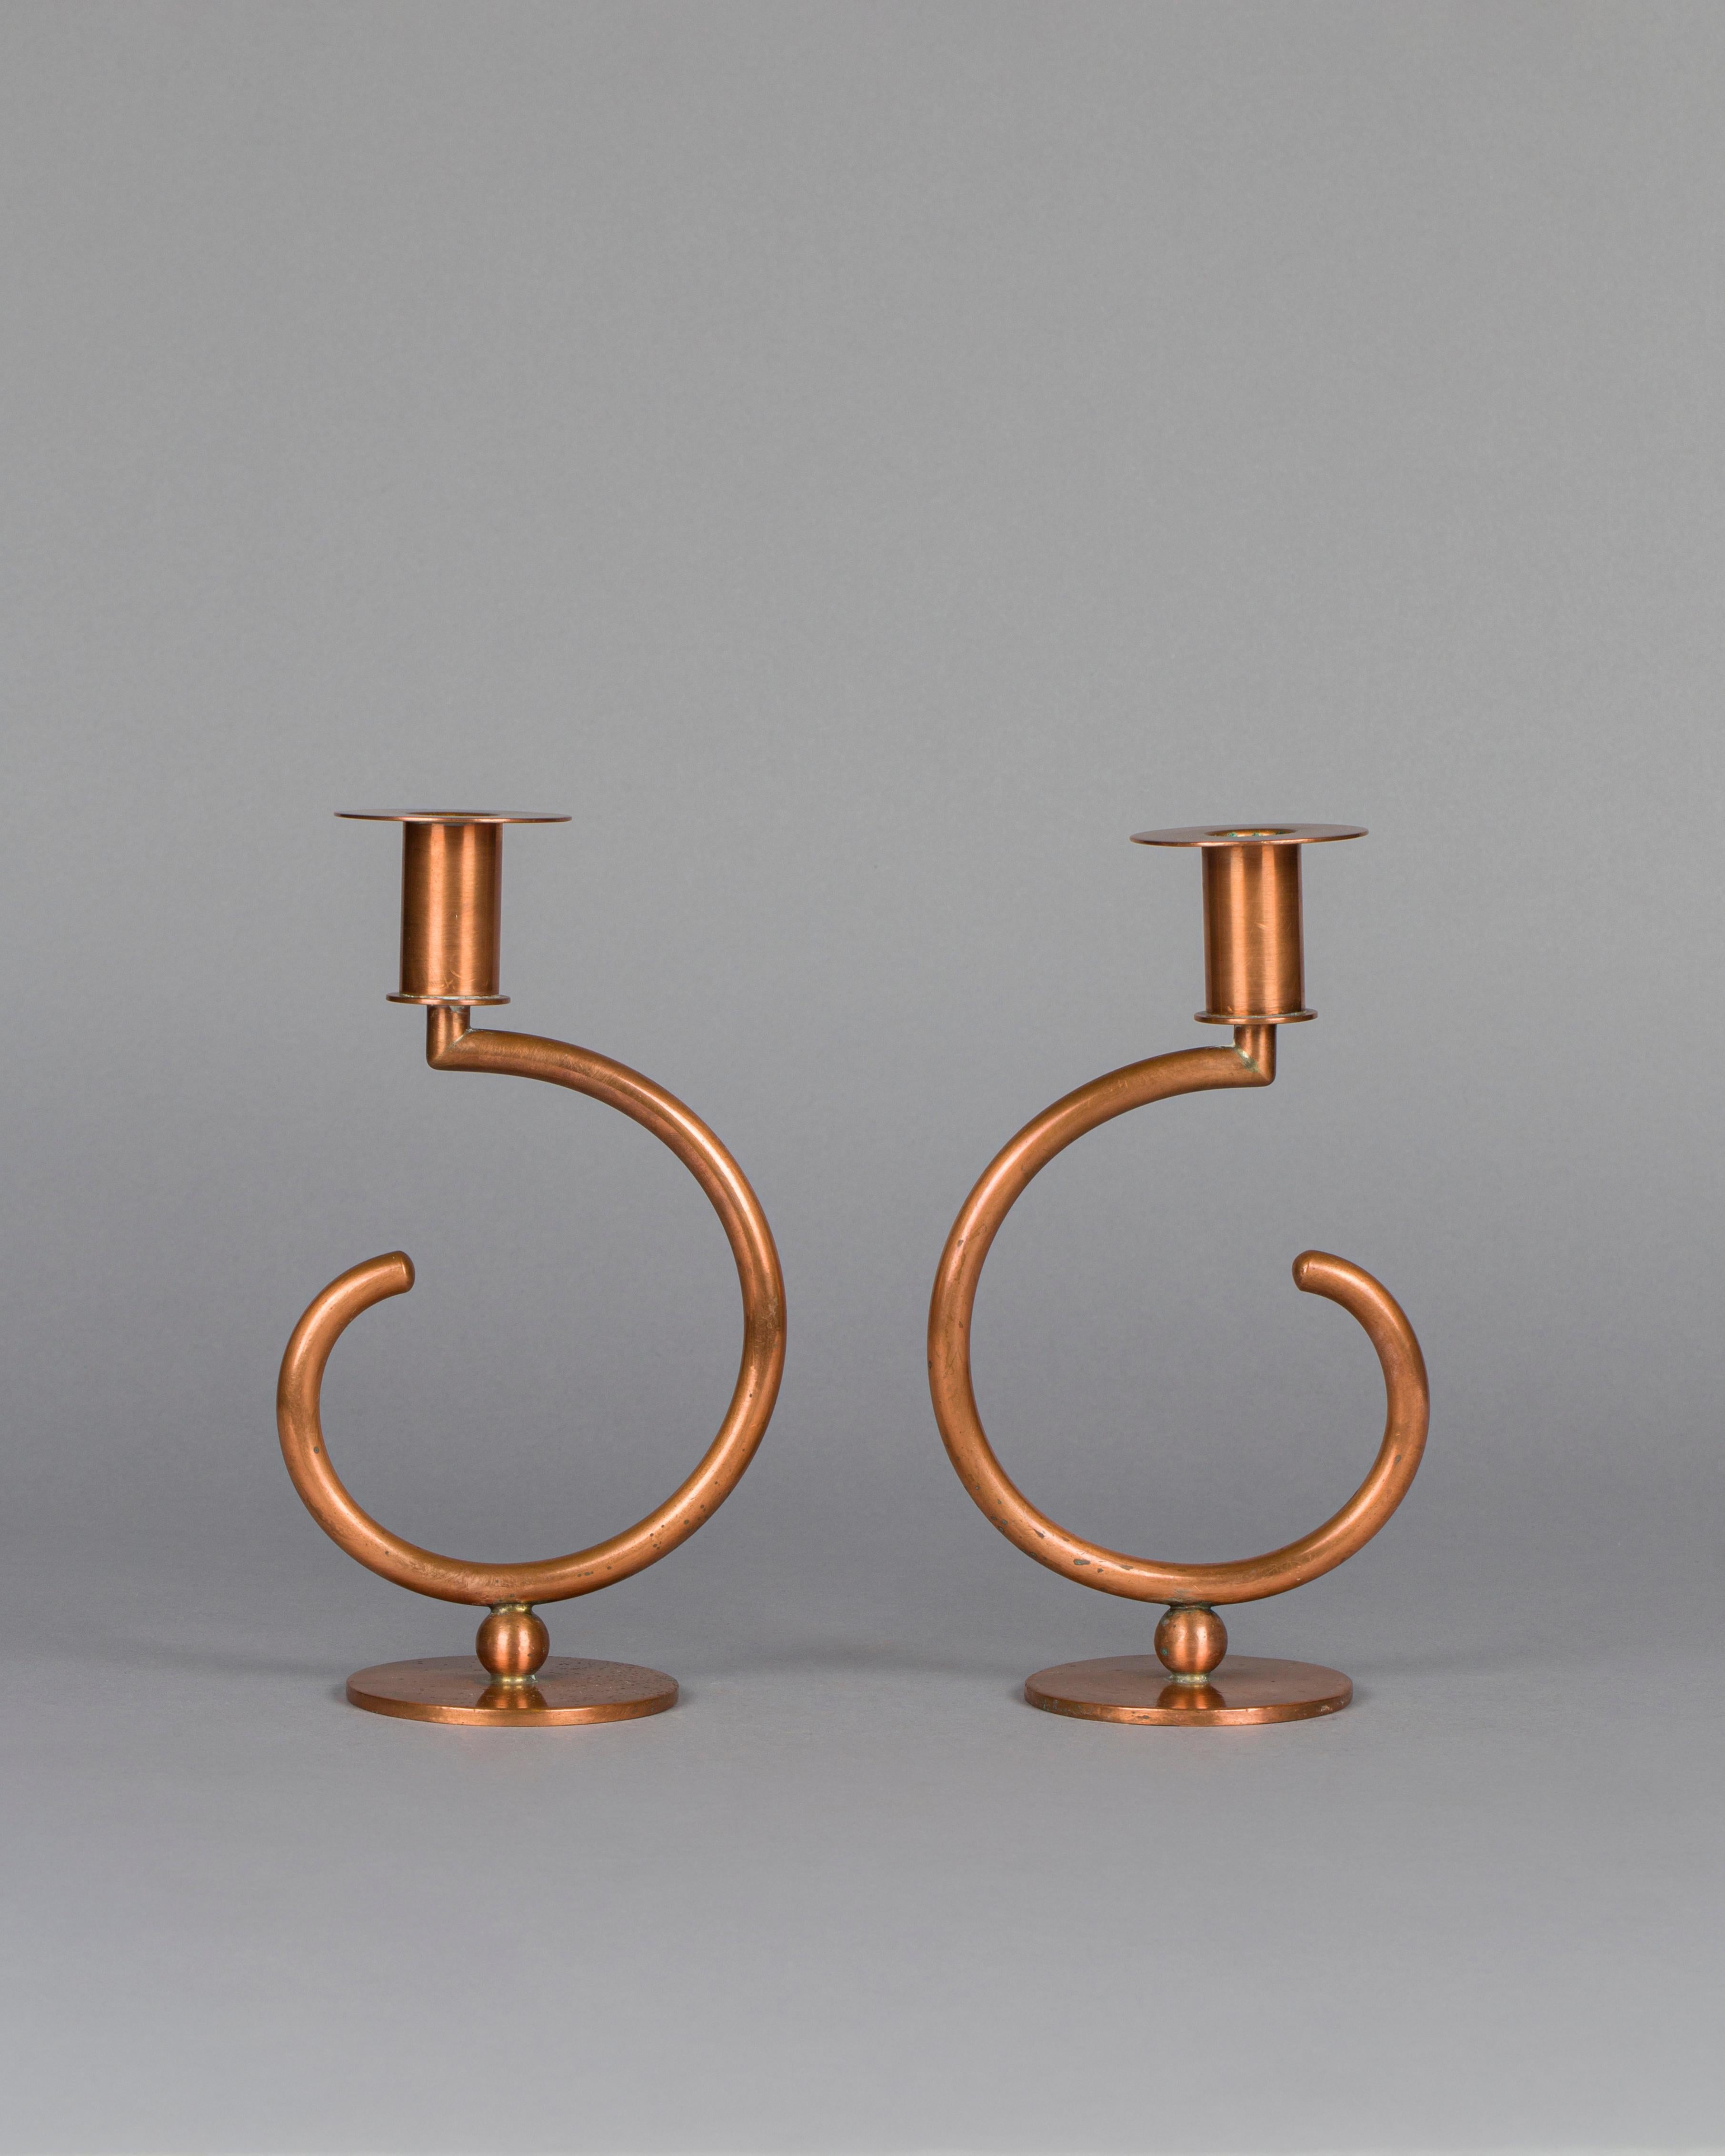 Albert Reimann
Pair of Candlesticks, 1931
Model 21007
Manufactured by Chase Brass & Copper Co.
Brass
Impressed manufacturer's mark to underside of each example ‘Chase Design by Reimann’.

Literature: Chase Complete: Deco Specialties of the